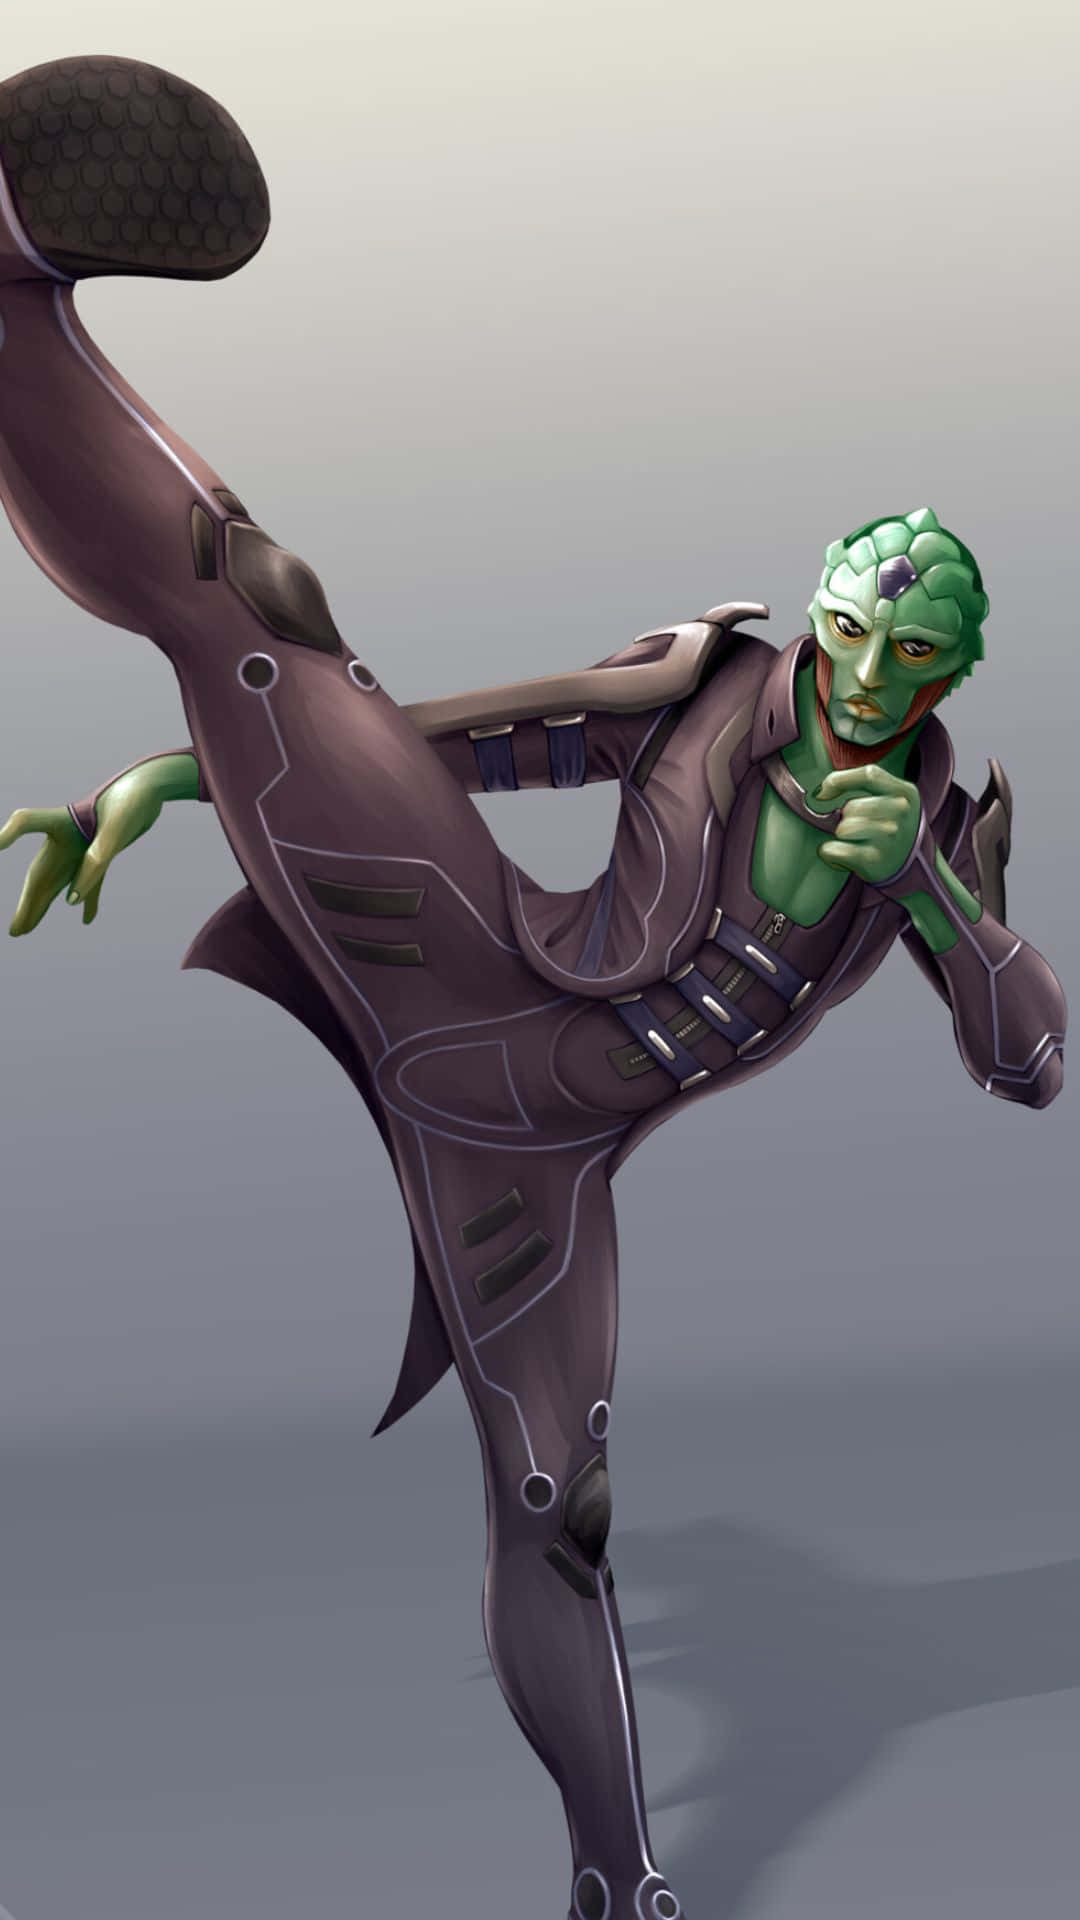 Thane Krios - Drell Assassin in Action Wallpaper